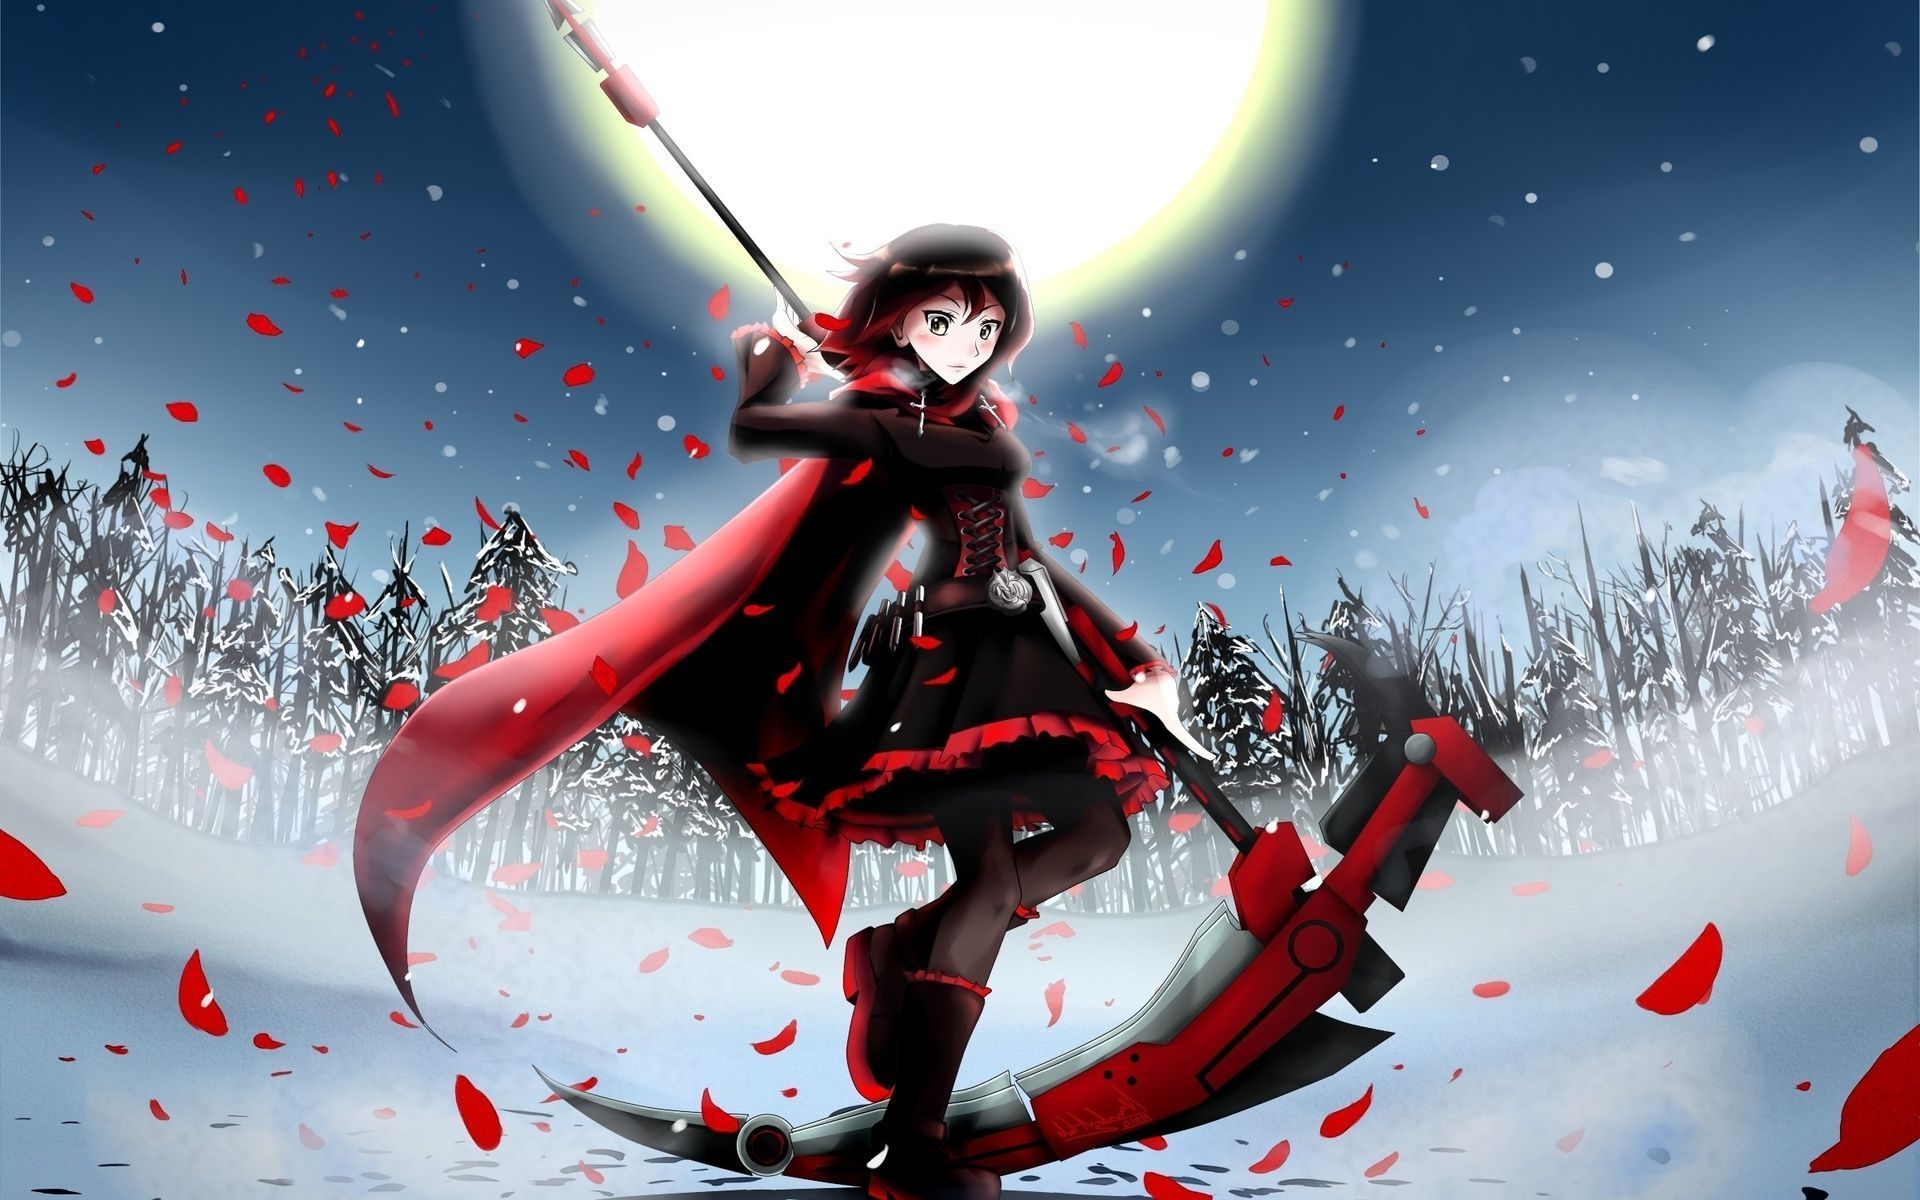 Ruby Rose Rwby Wallpapers